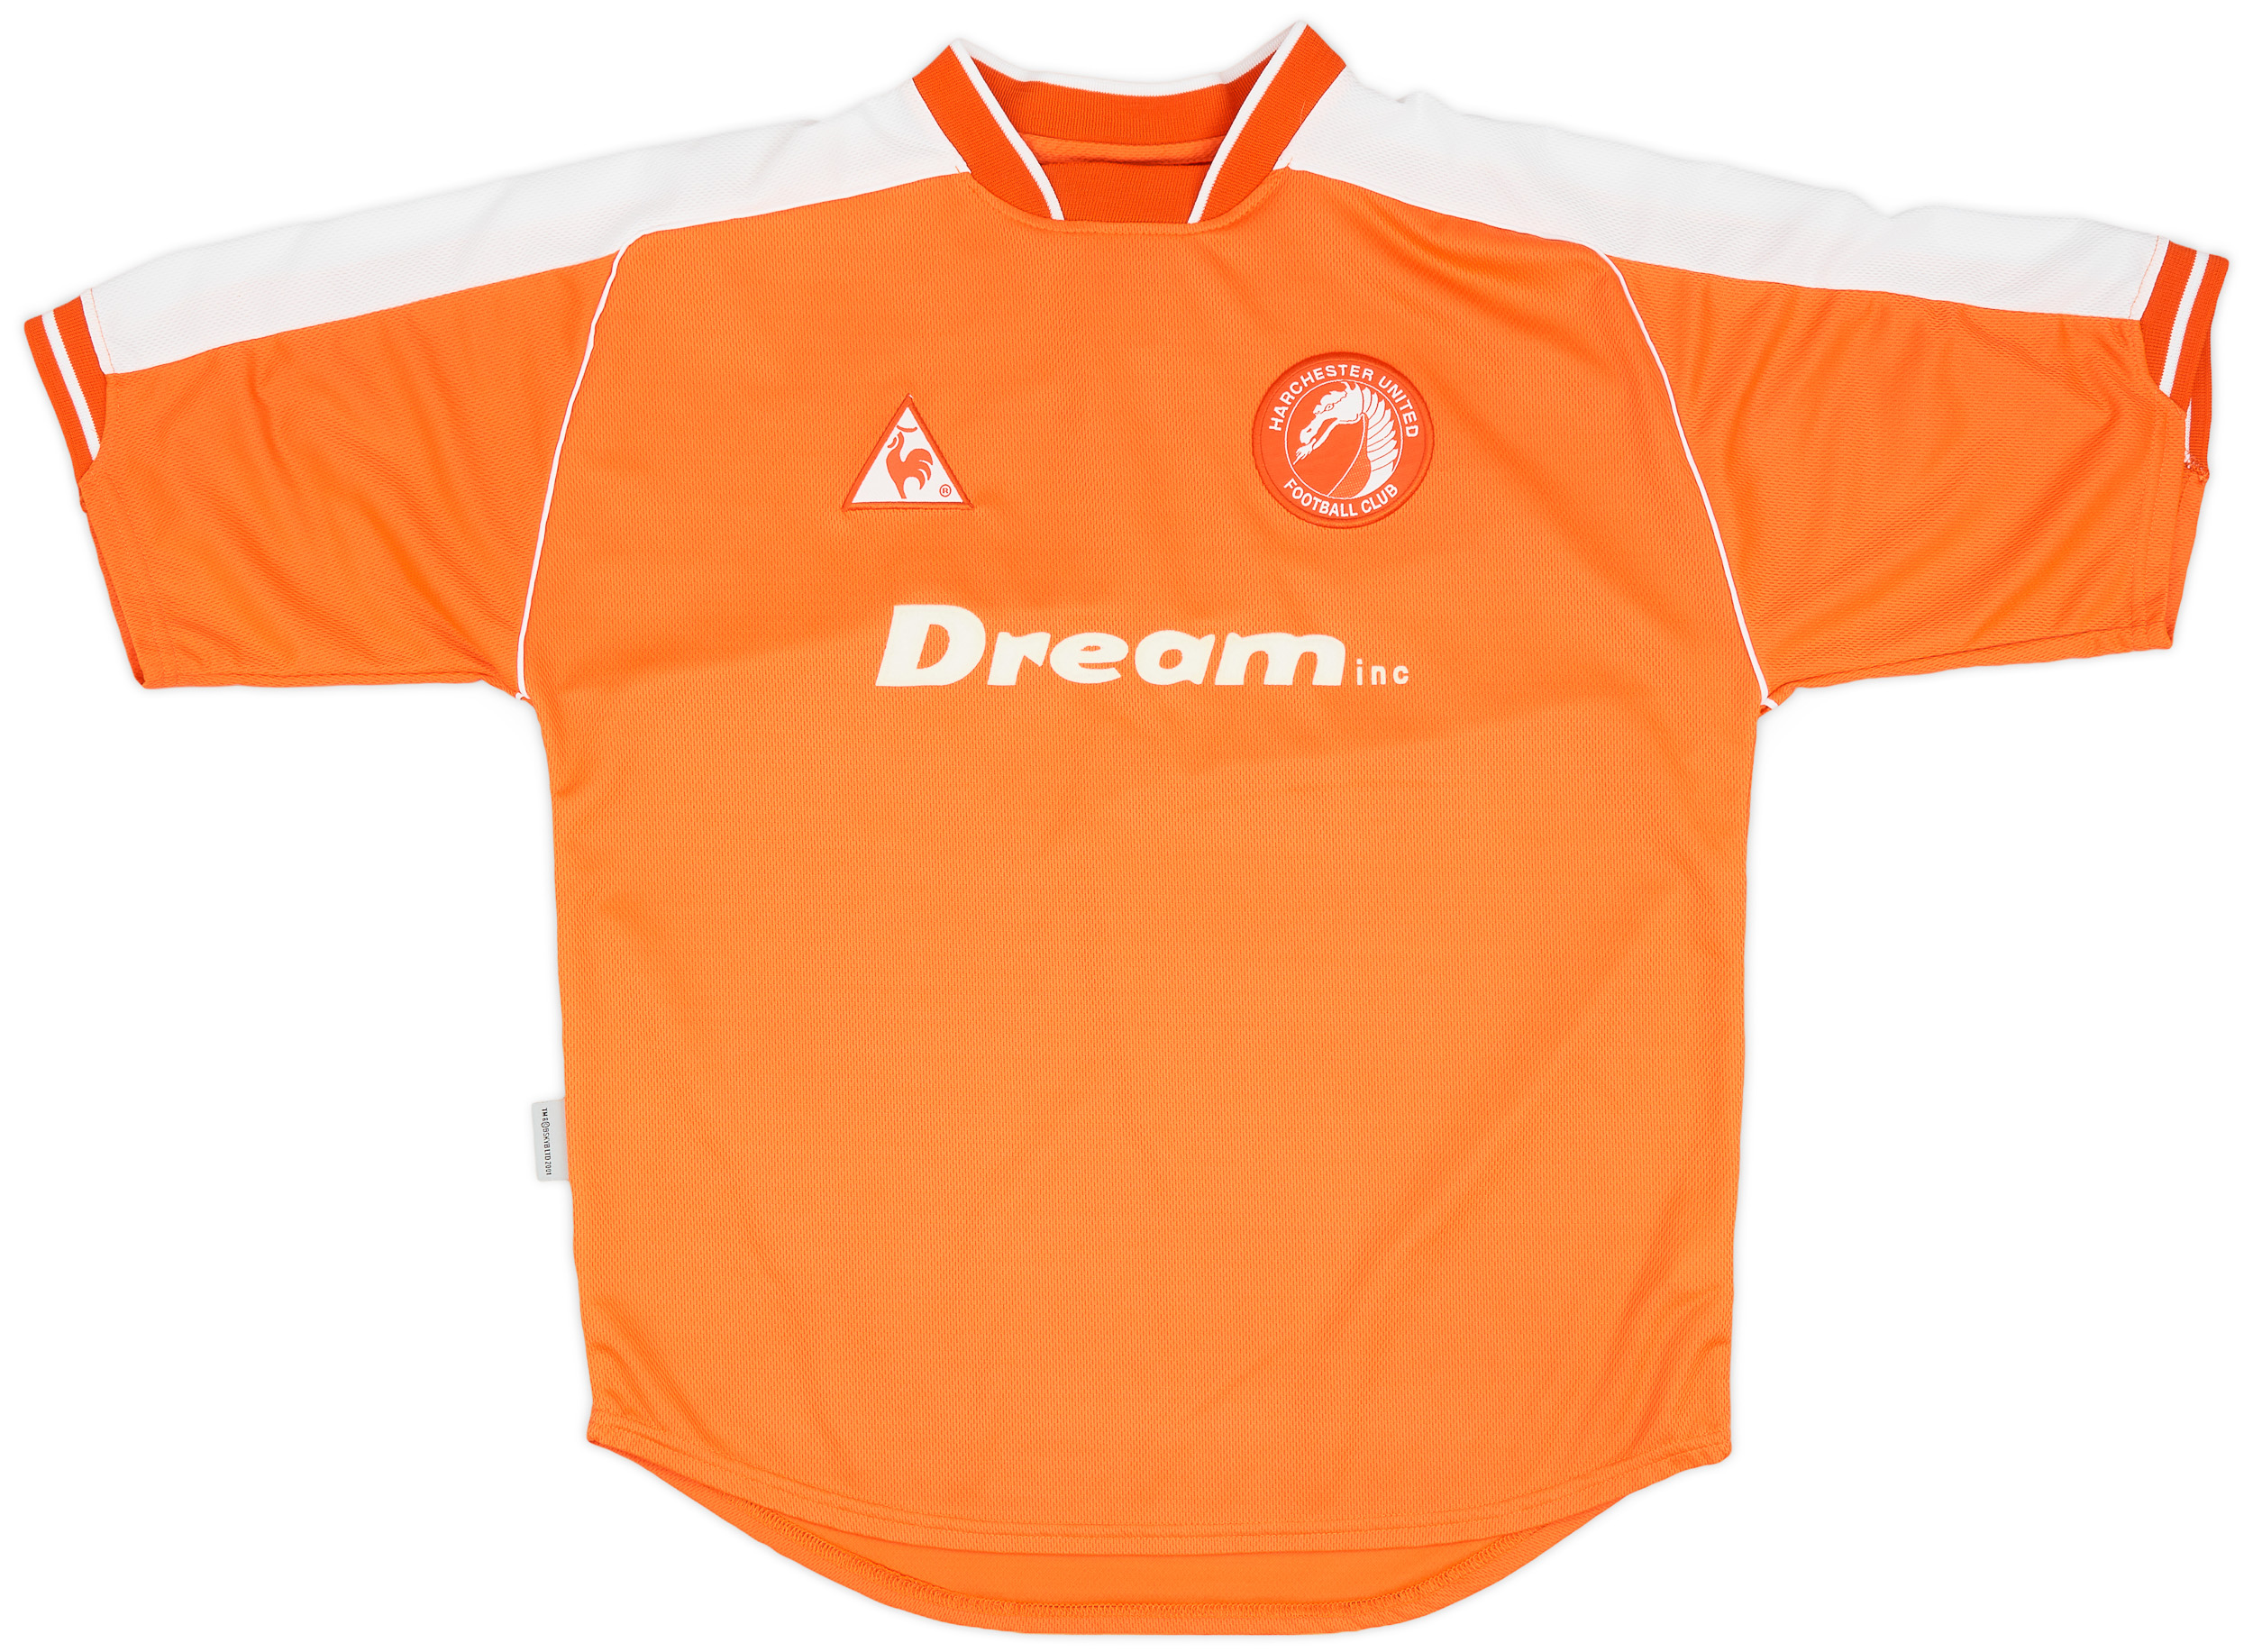 2001-02 Harchester United Away Shirt - 9/10 - ()